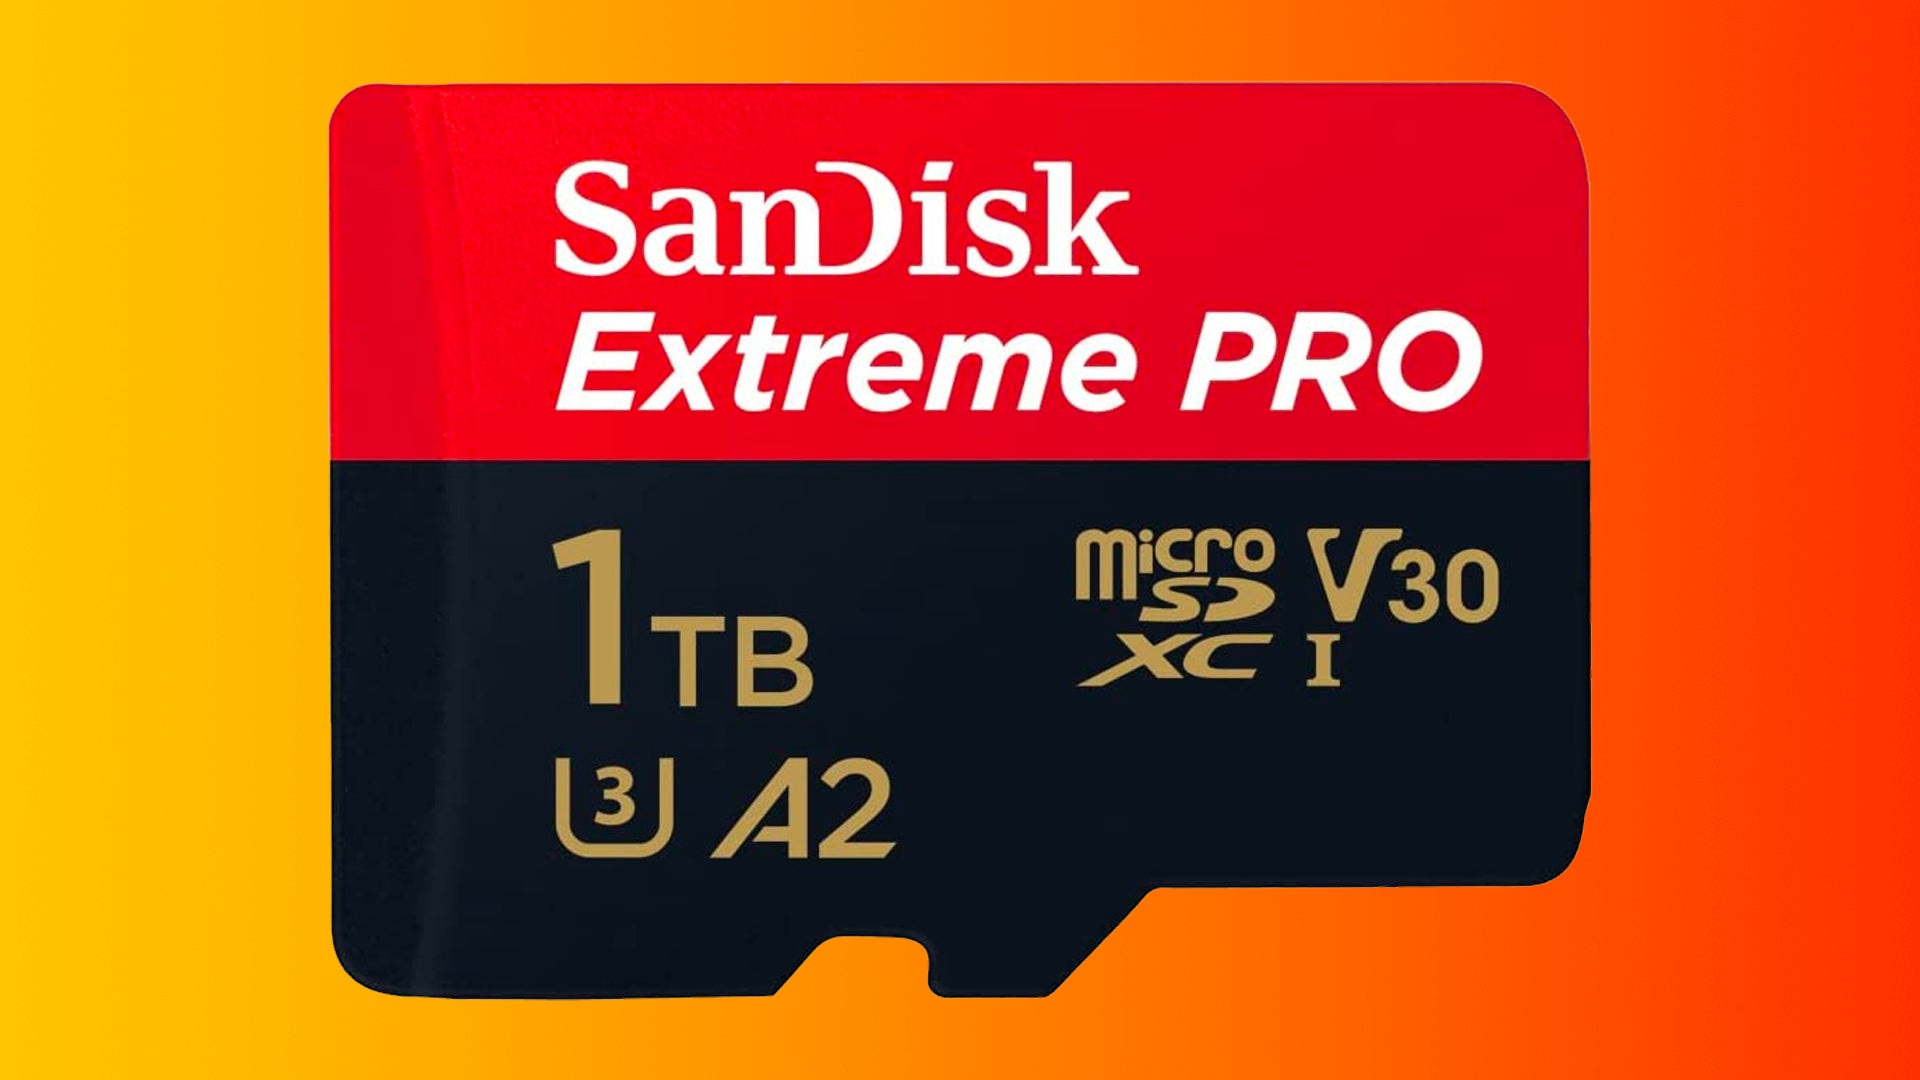 This 1TB SanDisk Extreme Pro MicroSD card is just £129 from Amazon